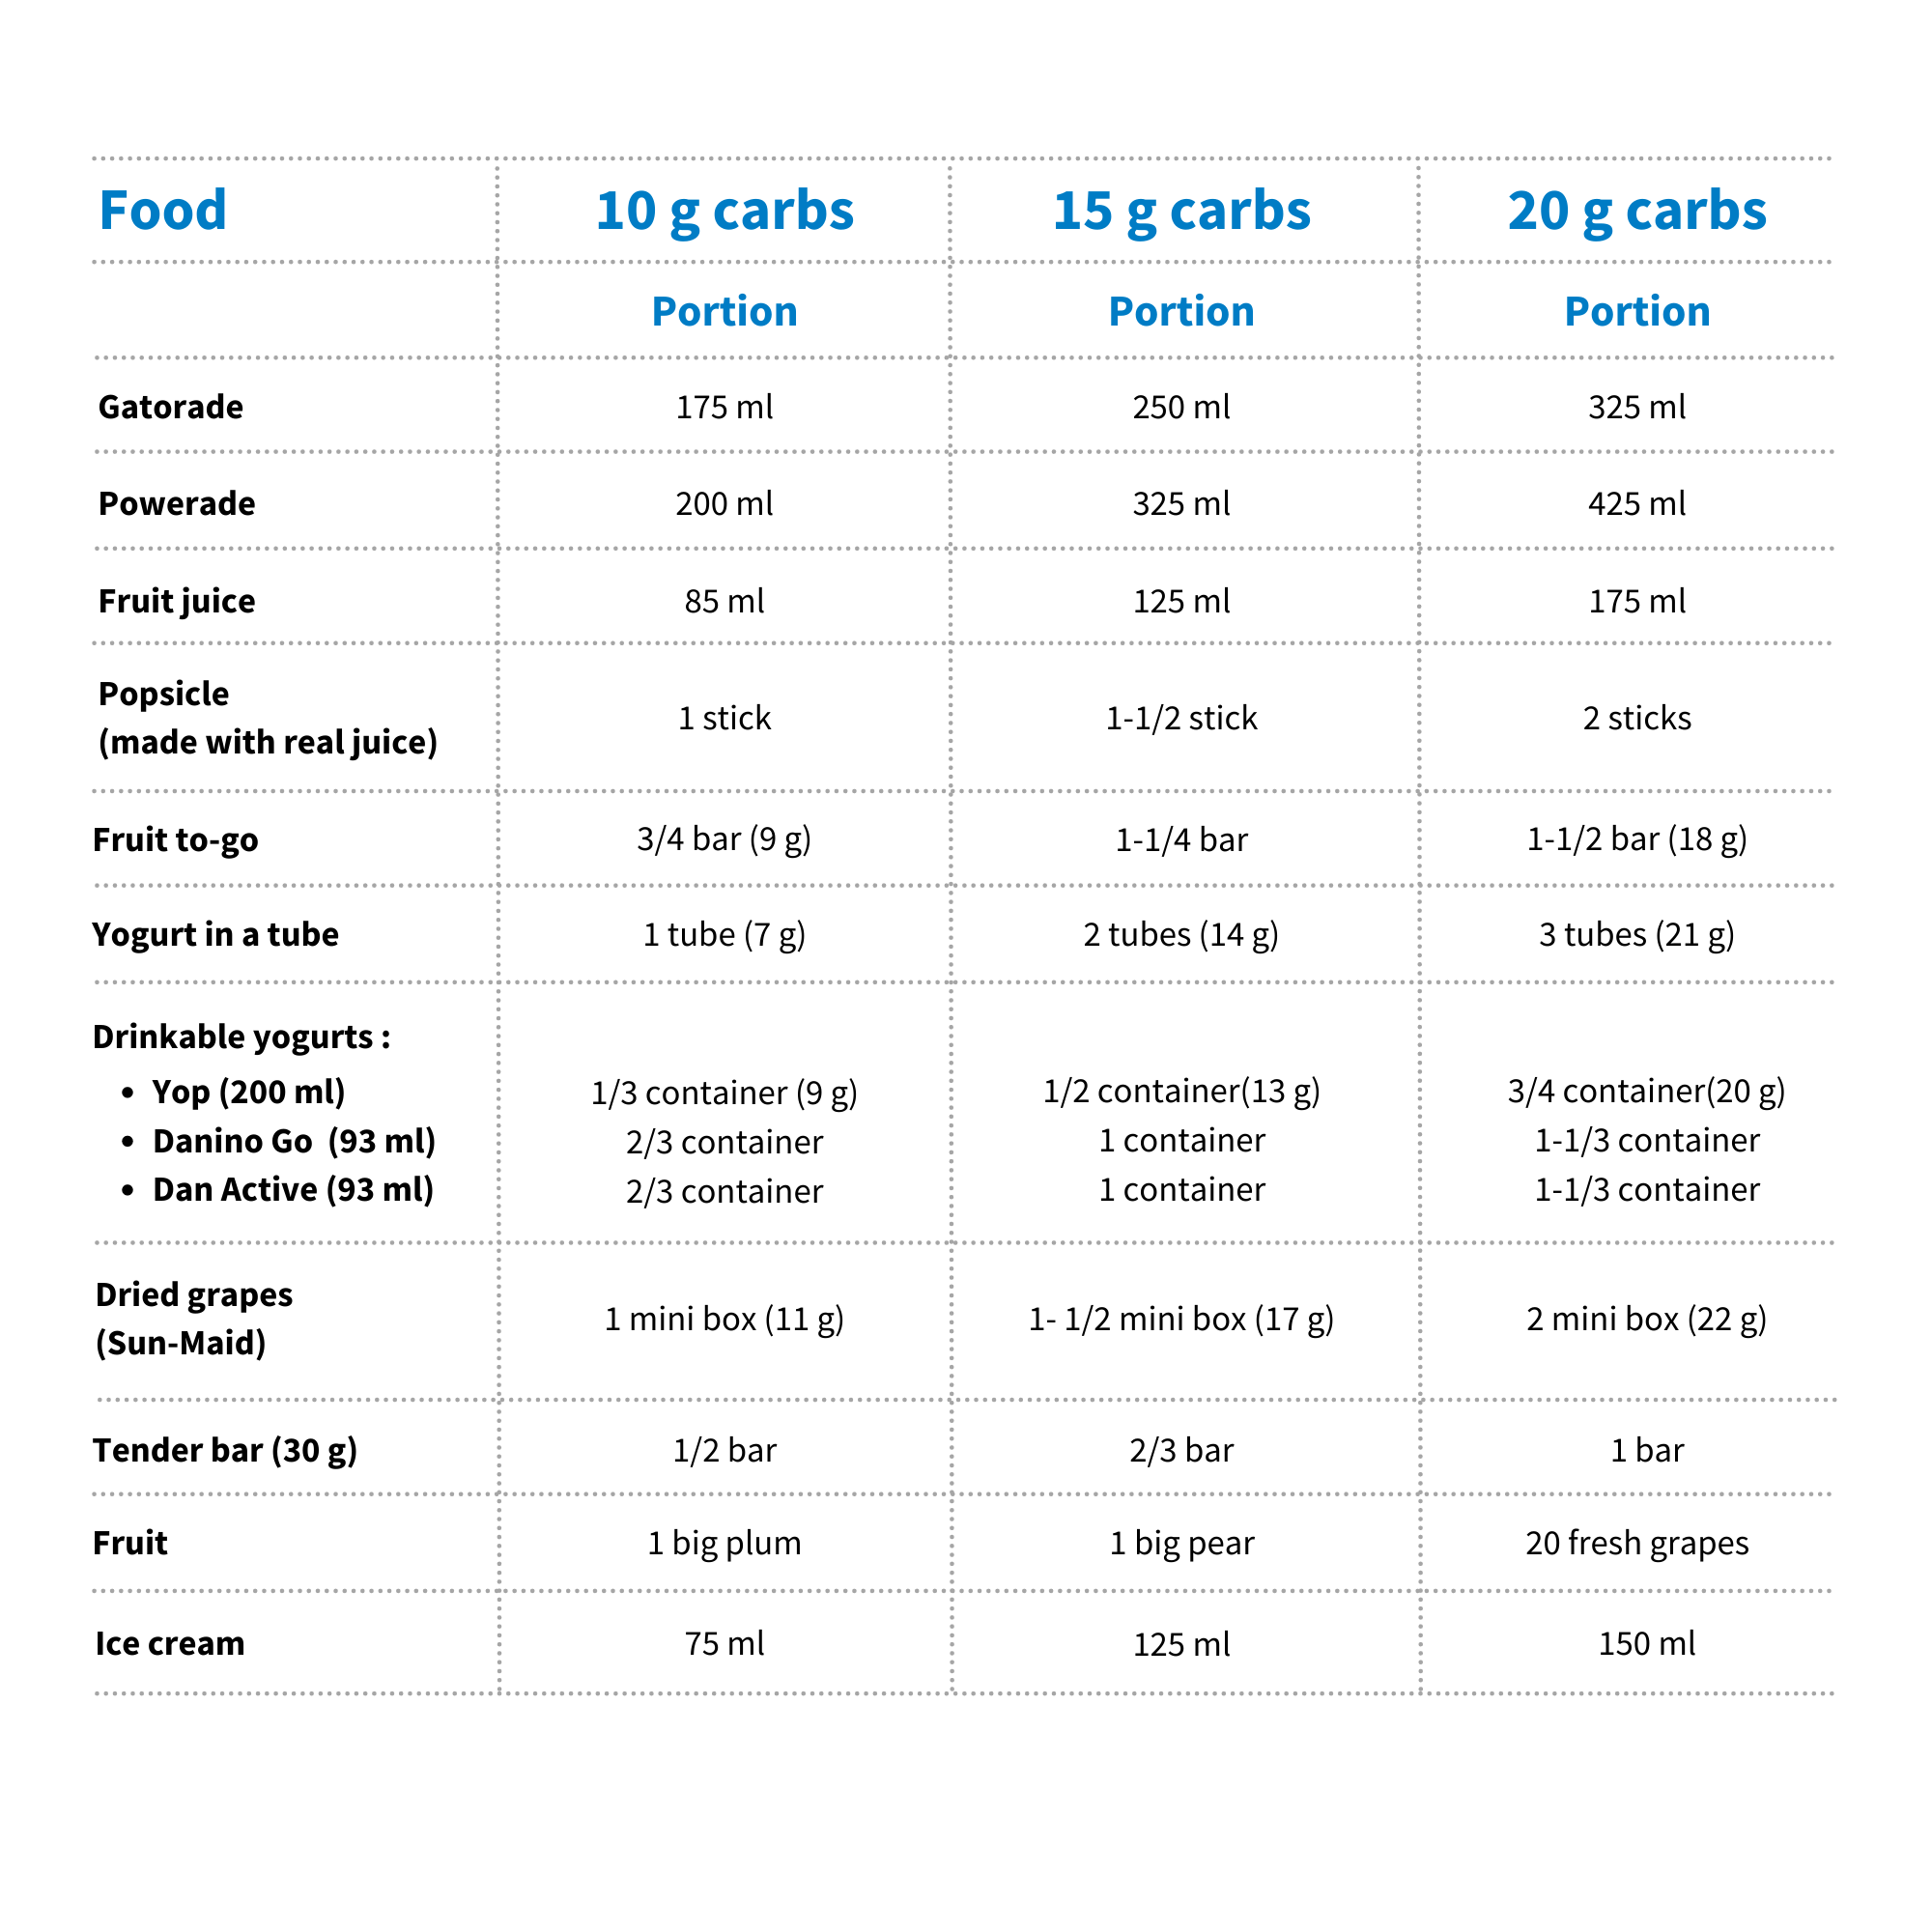 Examples of easy-to-eat foods